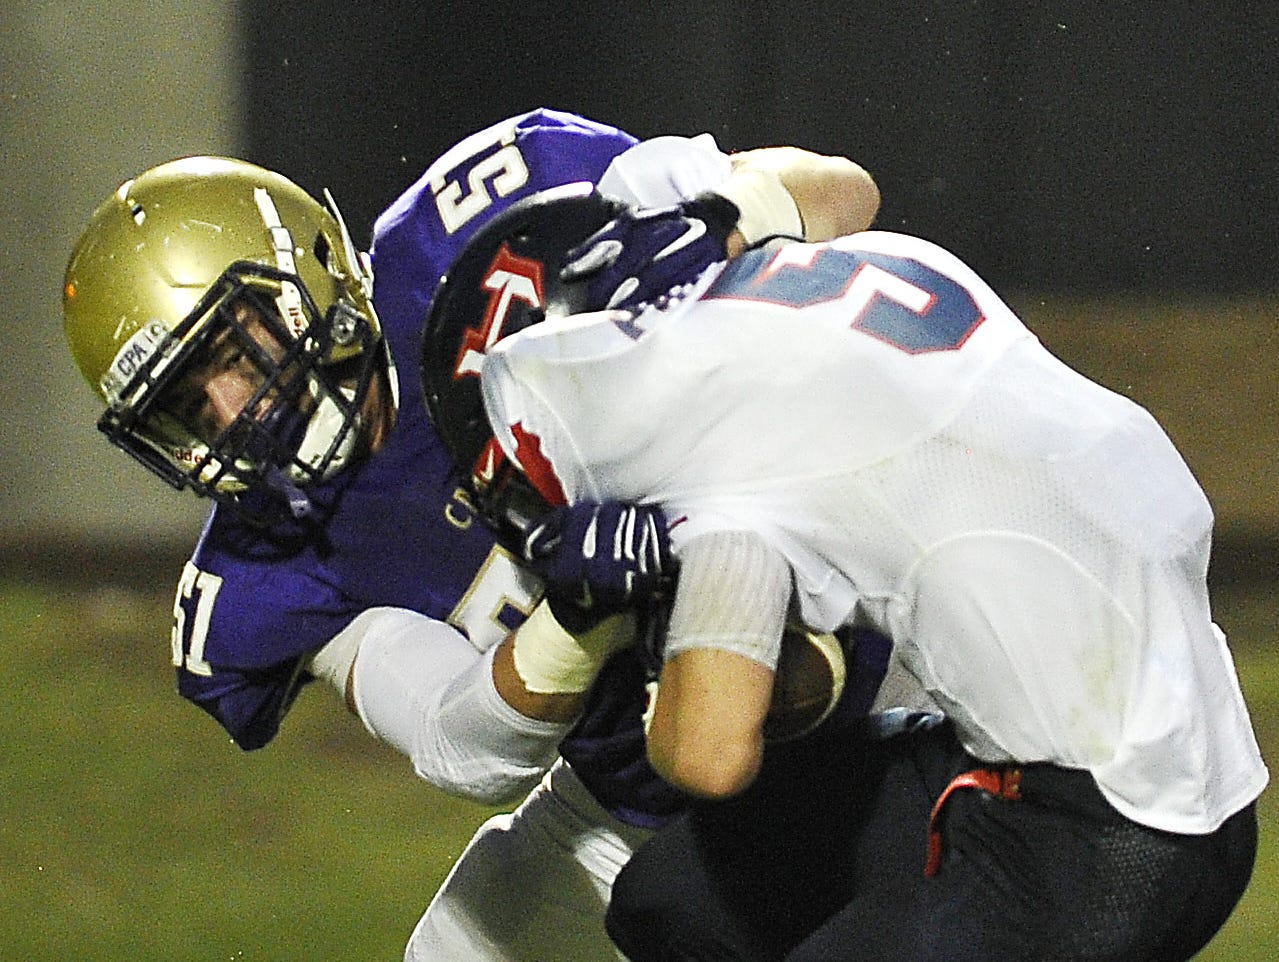 CPA linebacker Brad Smith (51) makes a tackle during last week's 35-28 win over White House Heritage.